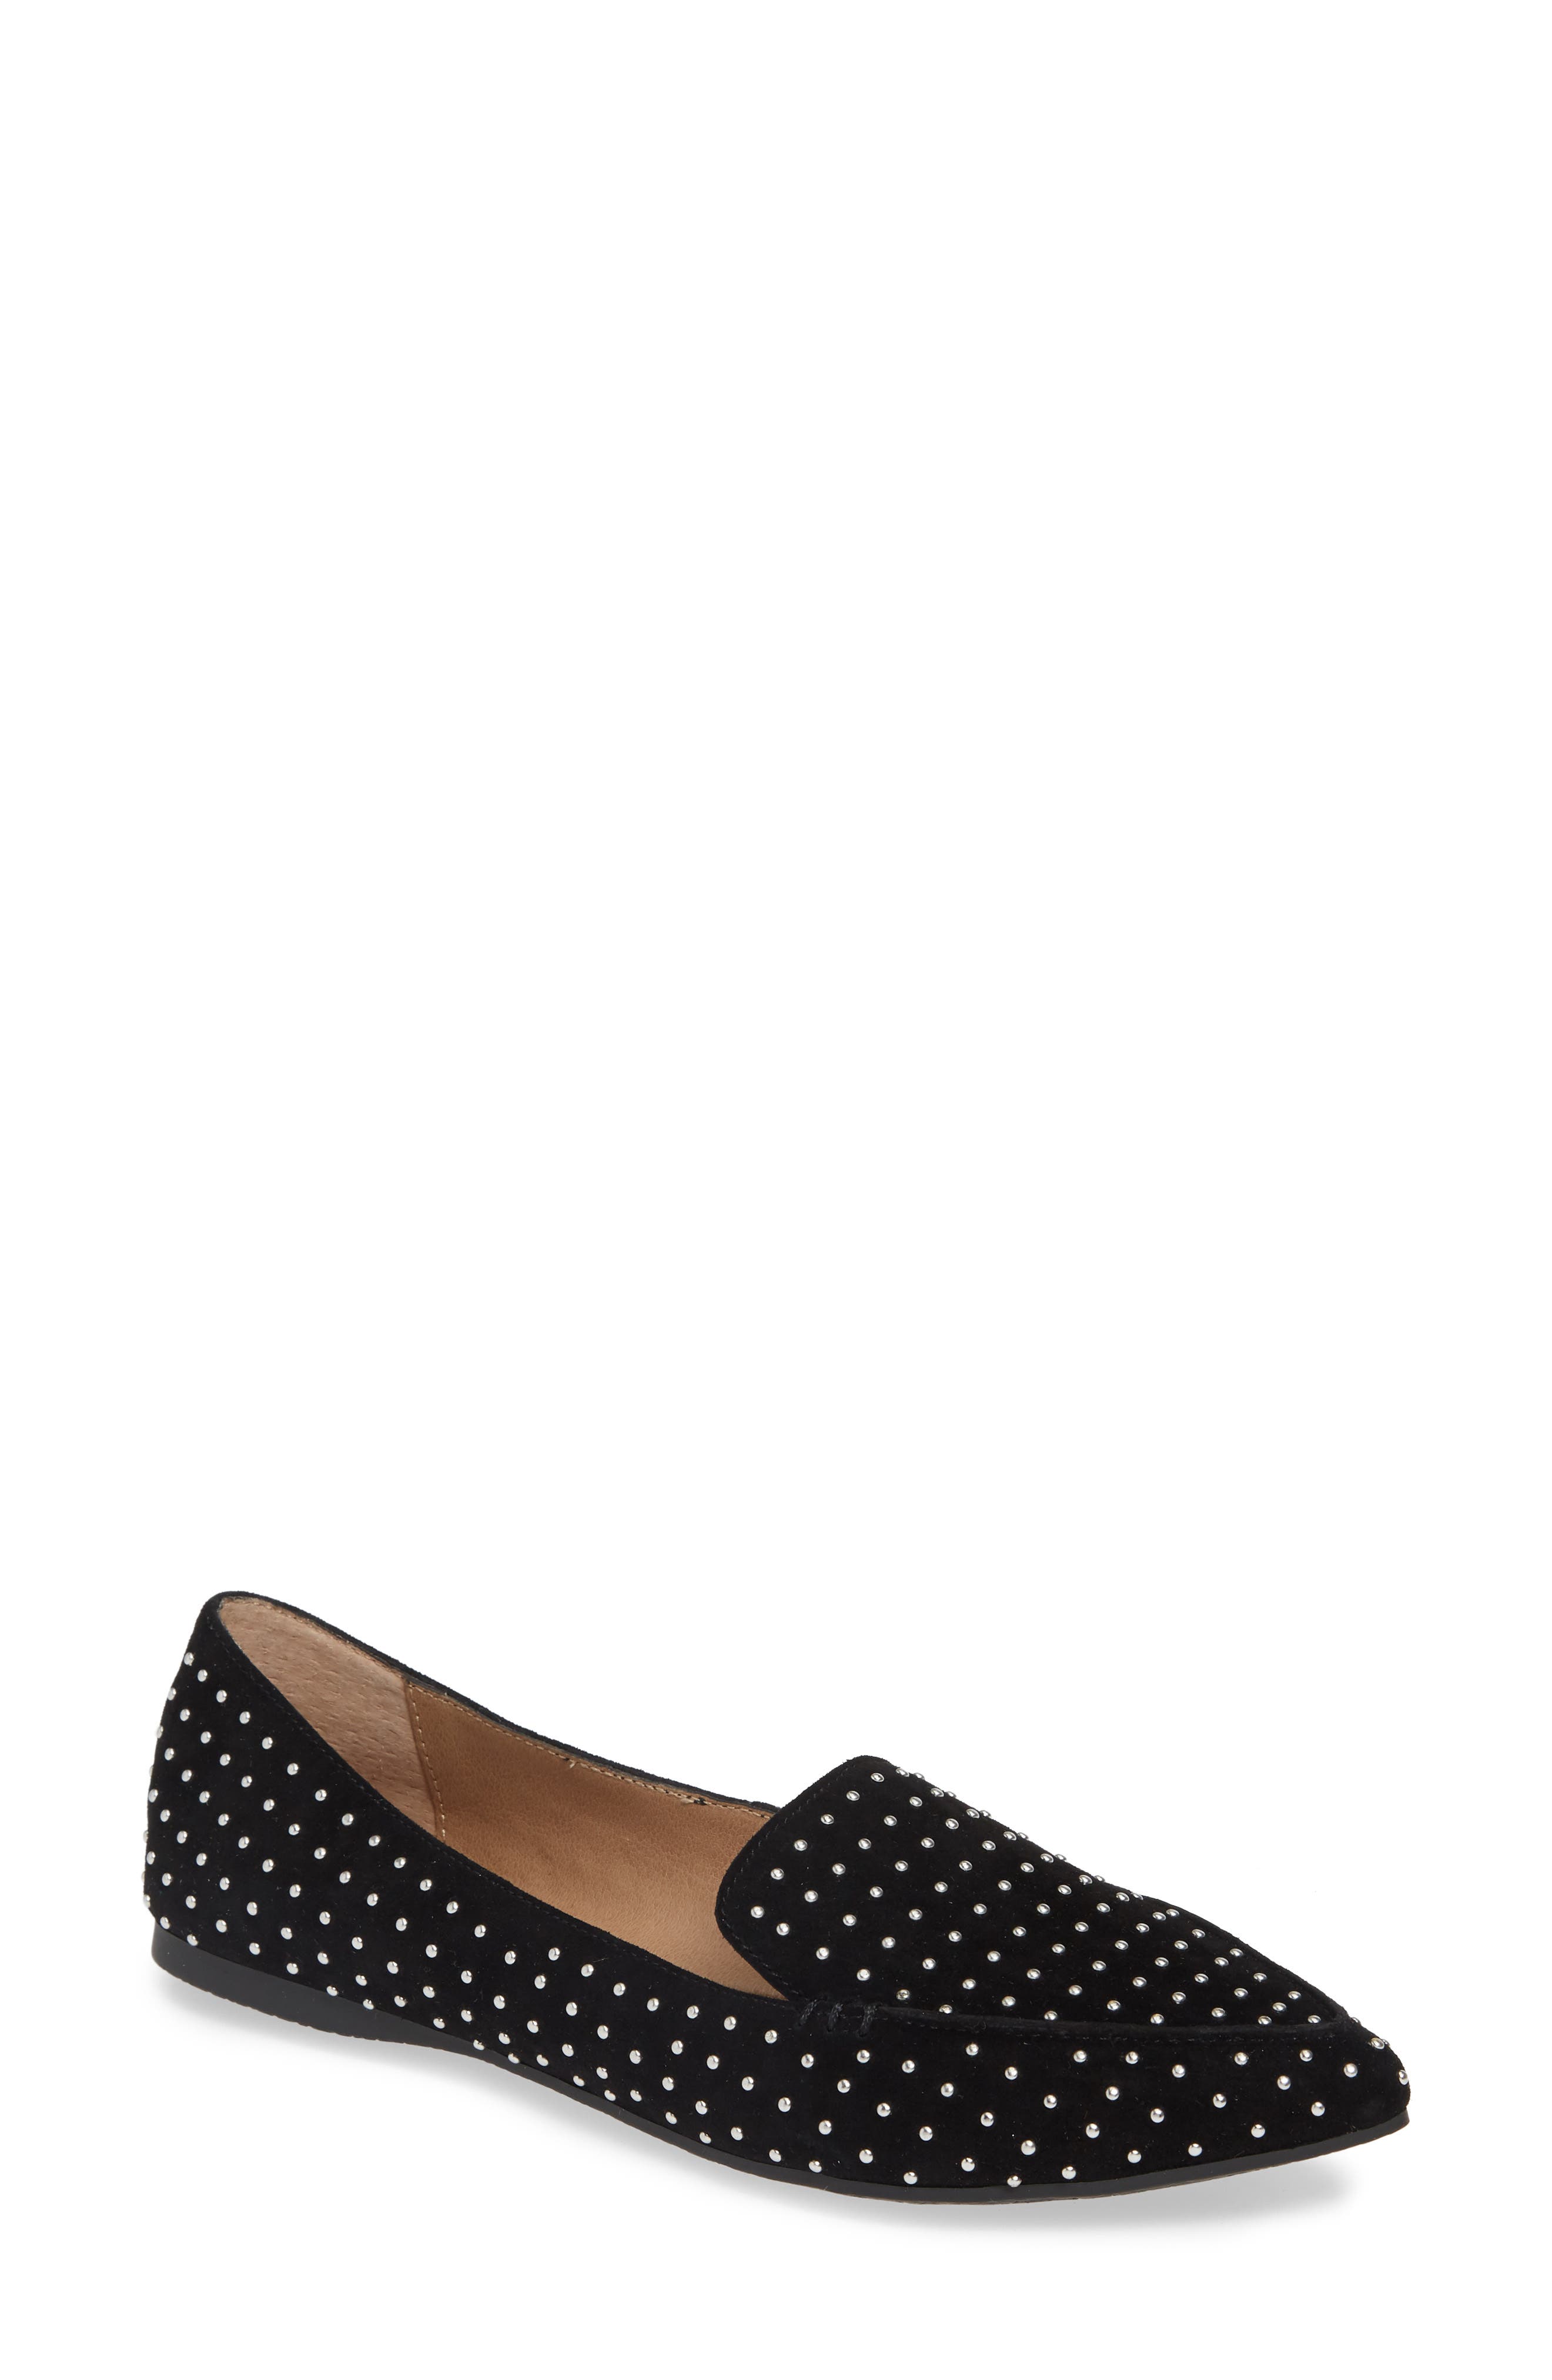 womens black studded loafers